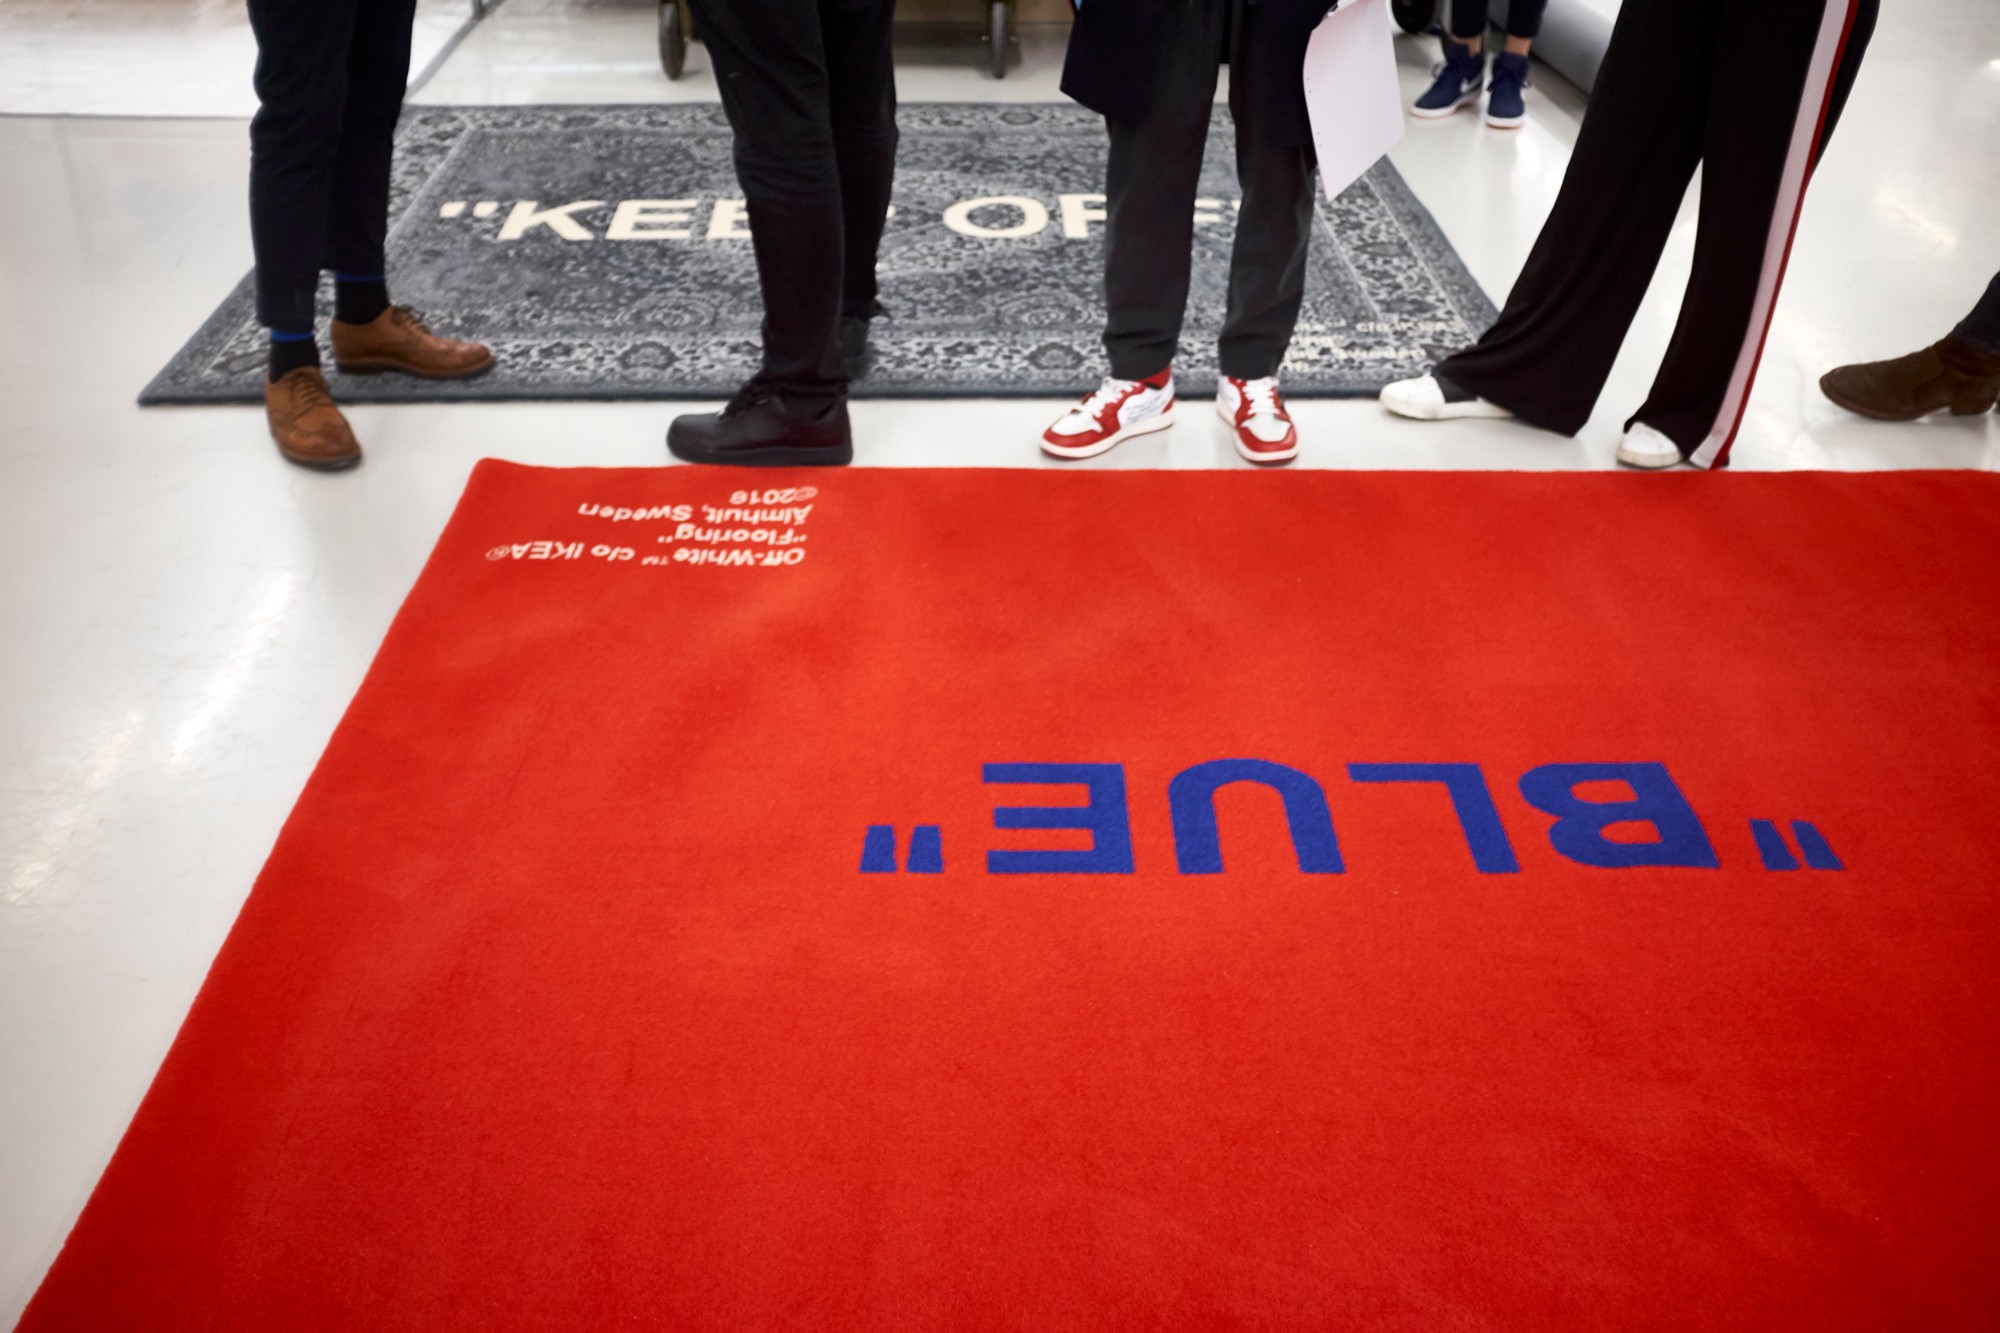 One of the carpets created by Virgil Abloh, the Off-White founder and designer, in collaboration with furniture and home accessories retailer Ikea, aims at design-focused millennial shoppers.